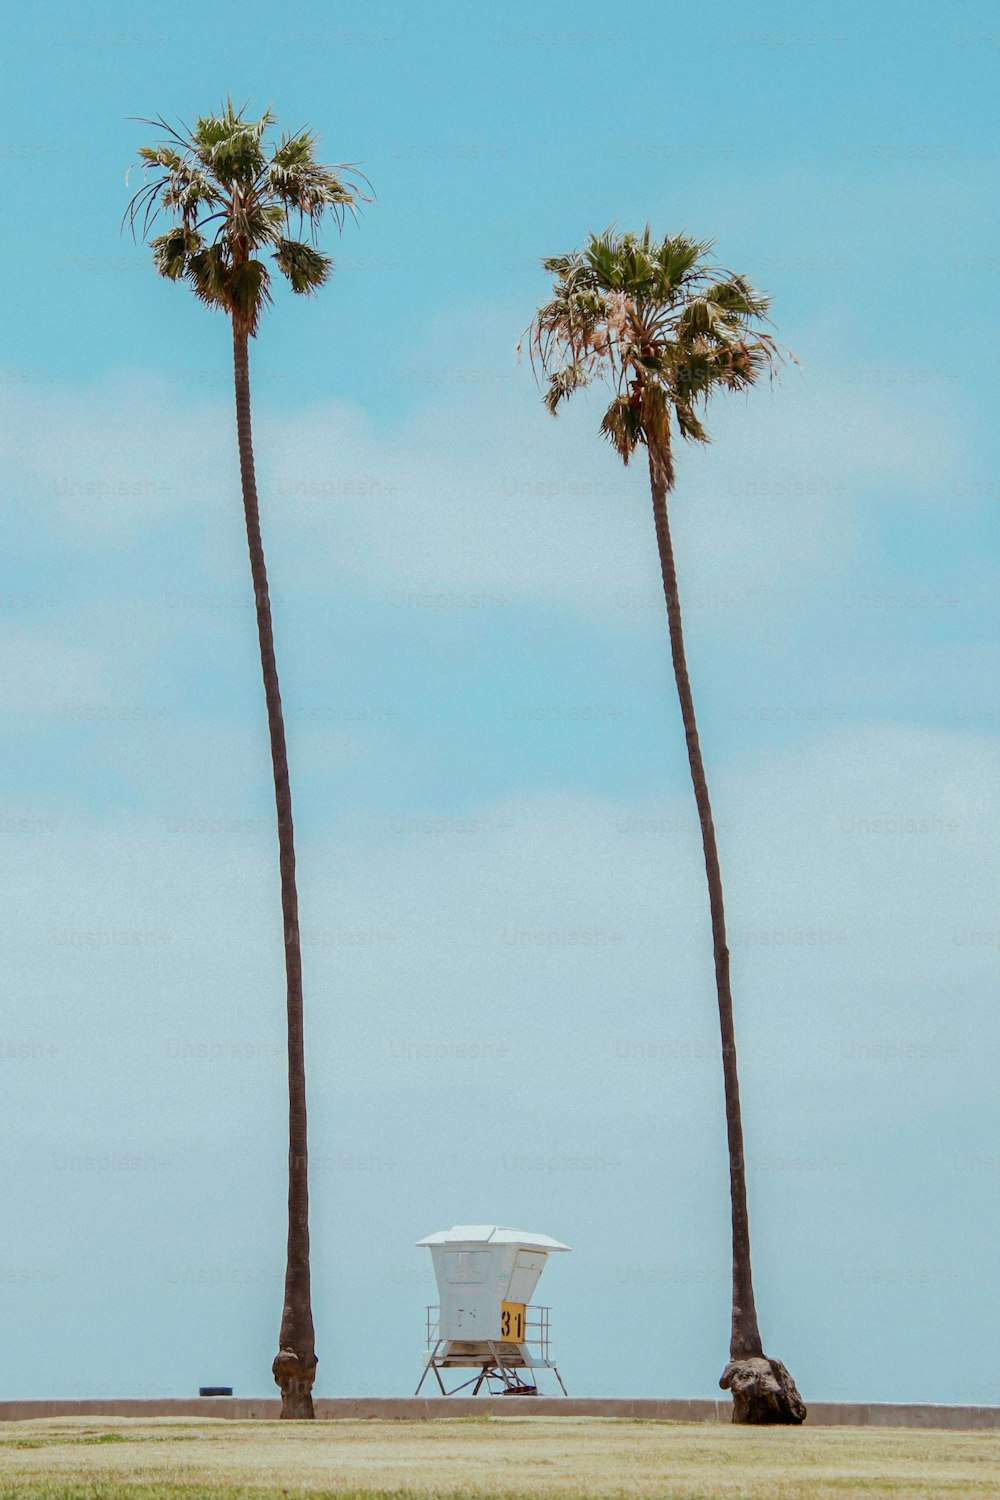 A vertical shot of a lifeguard tower between two palm trees on a beach of La Jolla, California